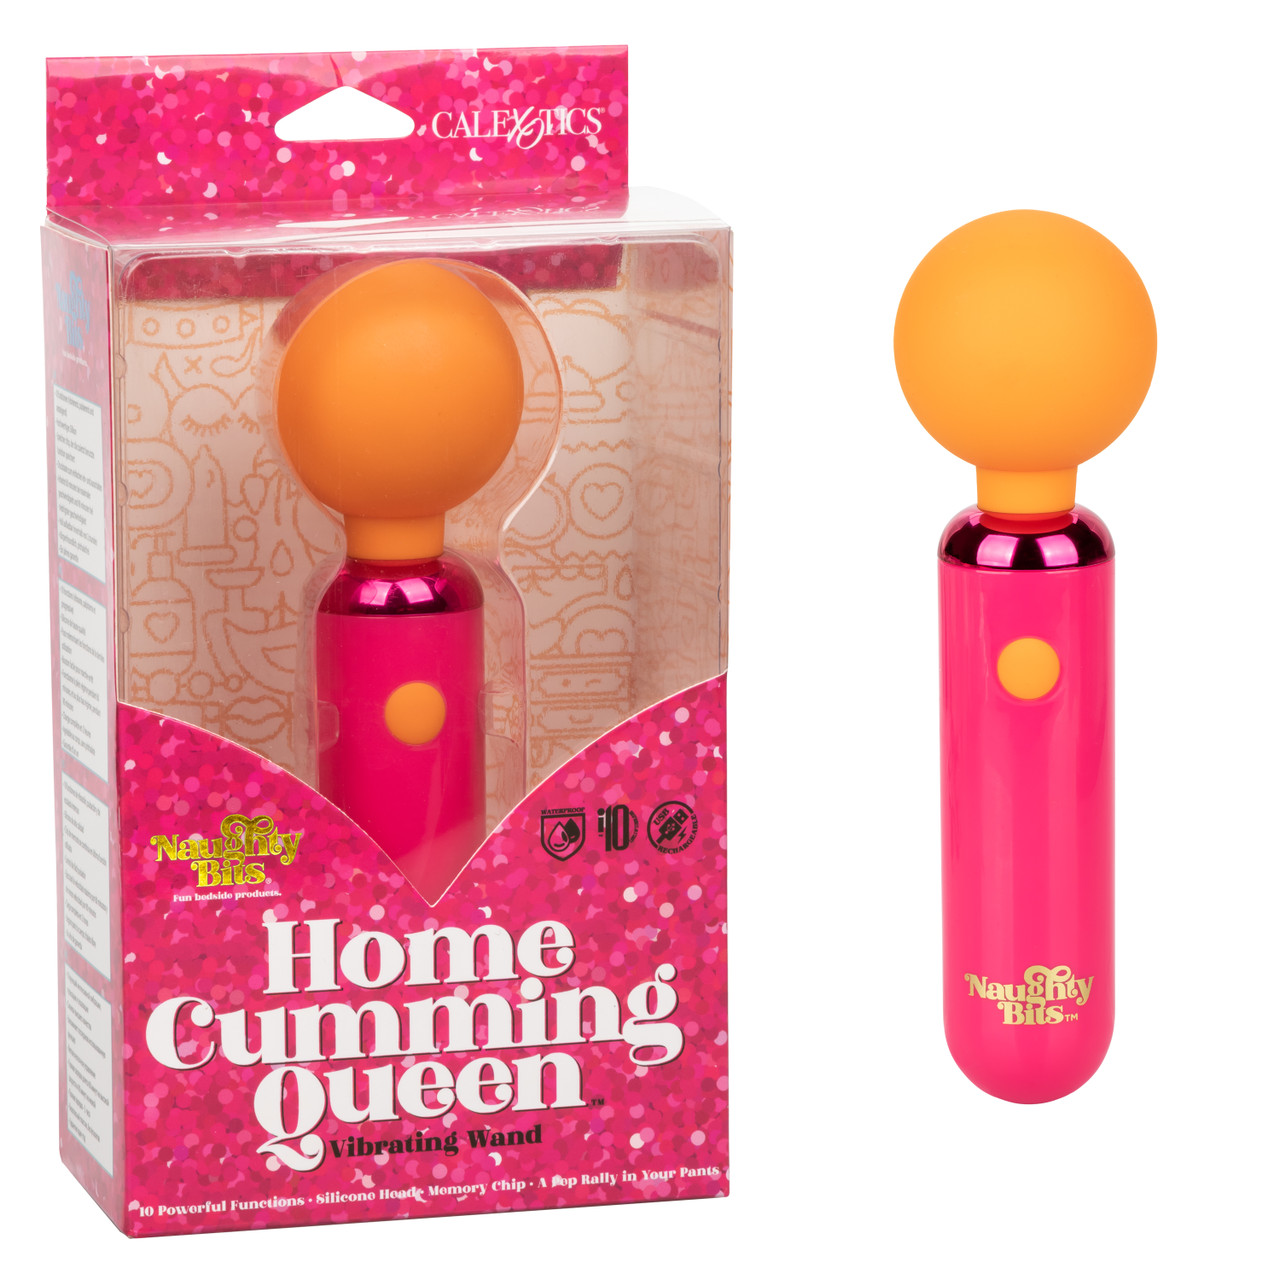 NAUGHTY BITS HOME CUMMING QUEEN VIBRATING WAND - Click Image to Close